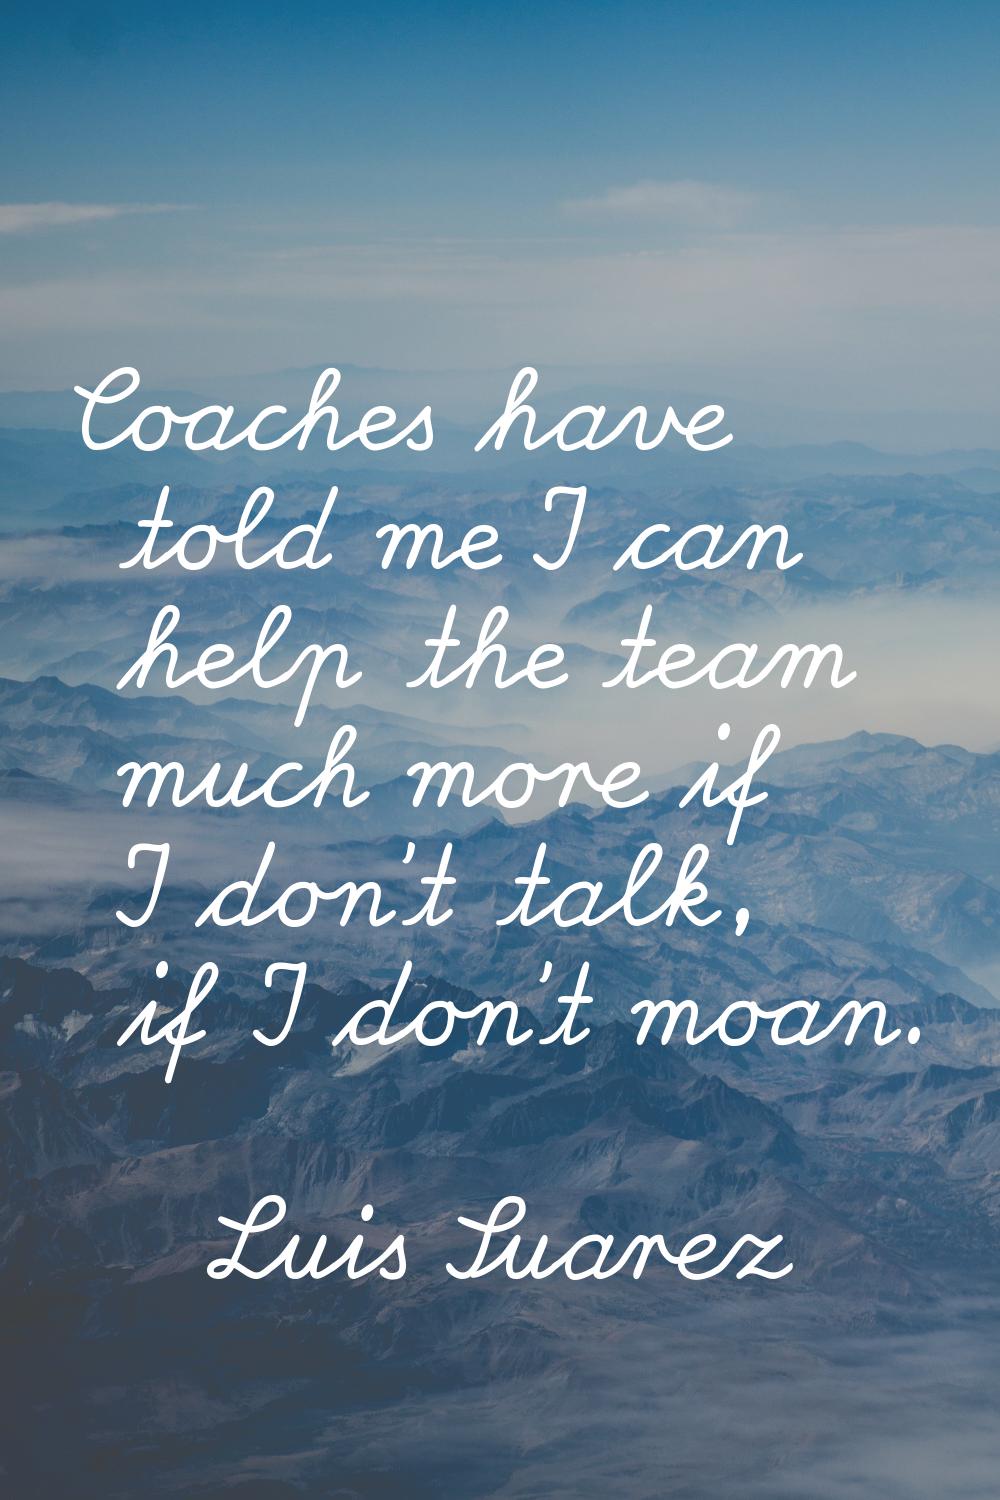 Coaches have told me I can help the team much more if I don't talk, if I don't moan.